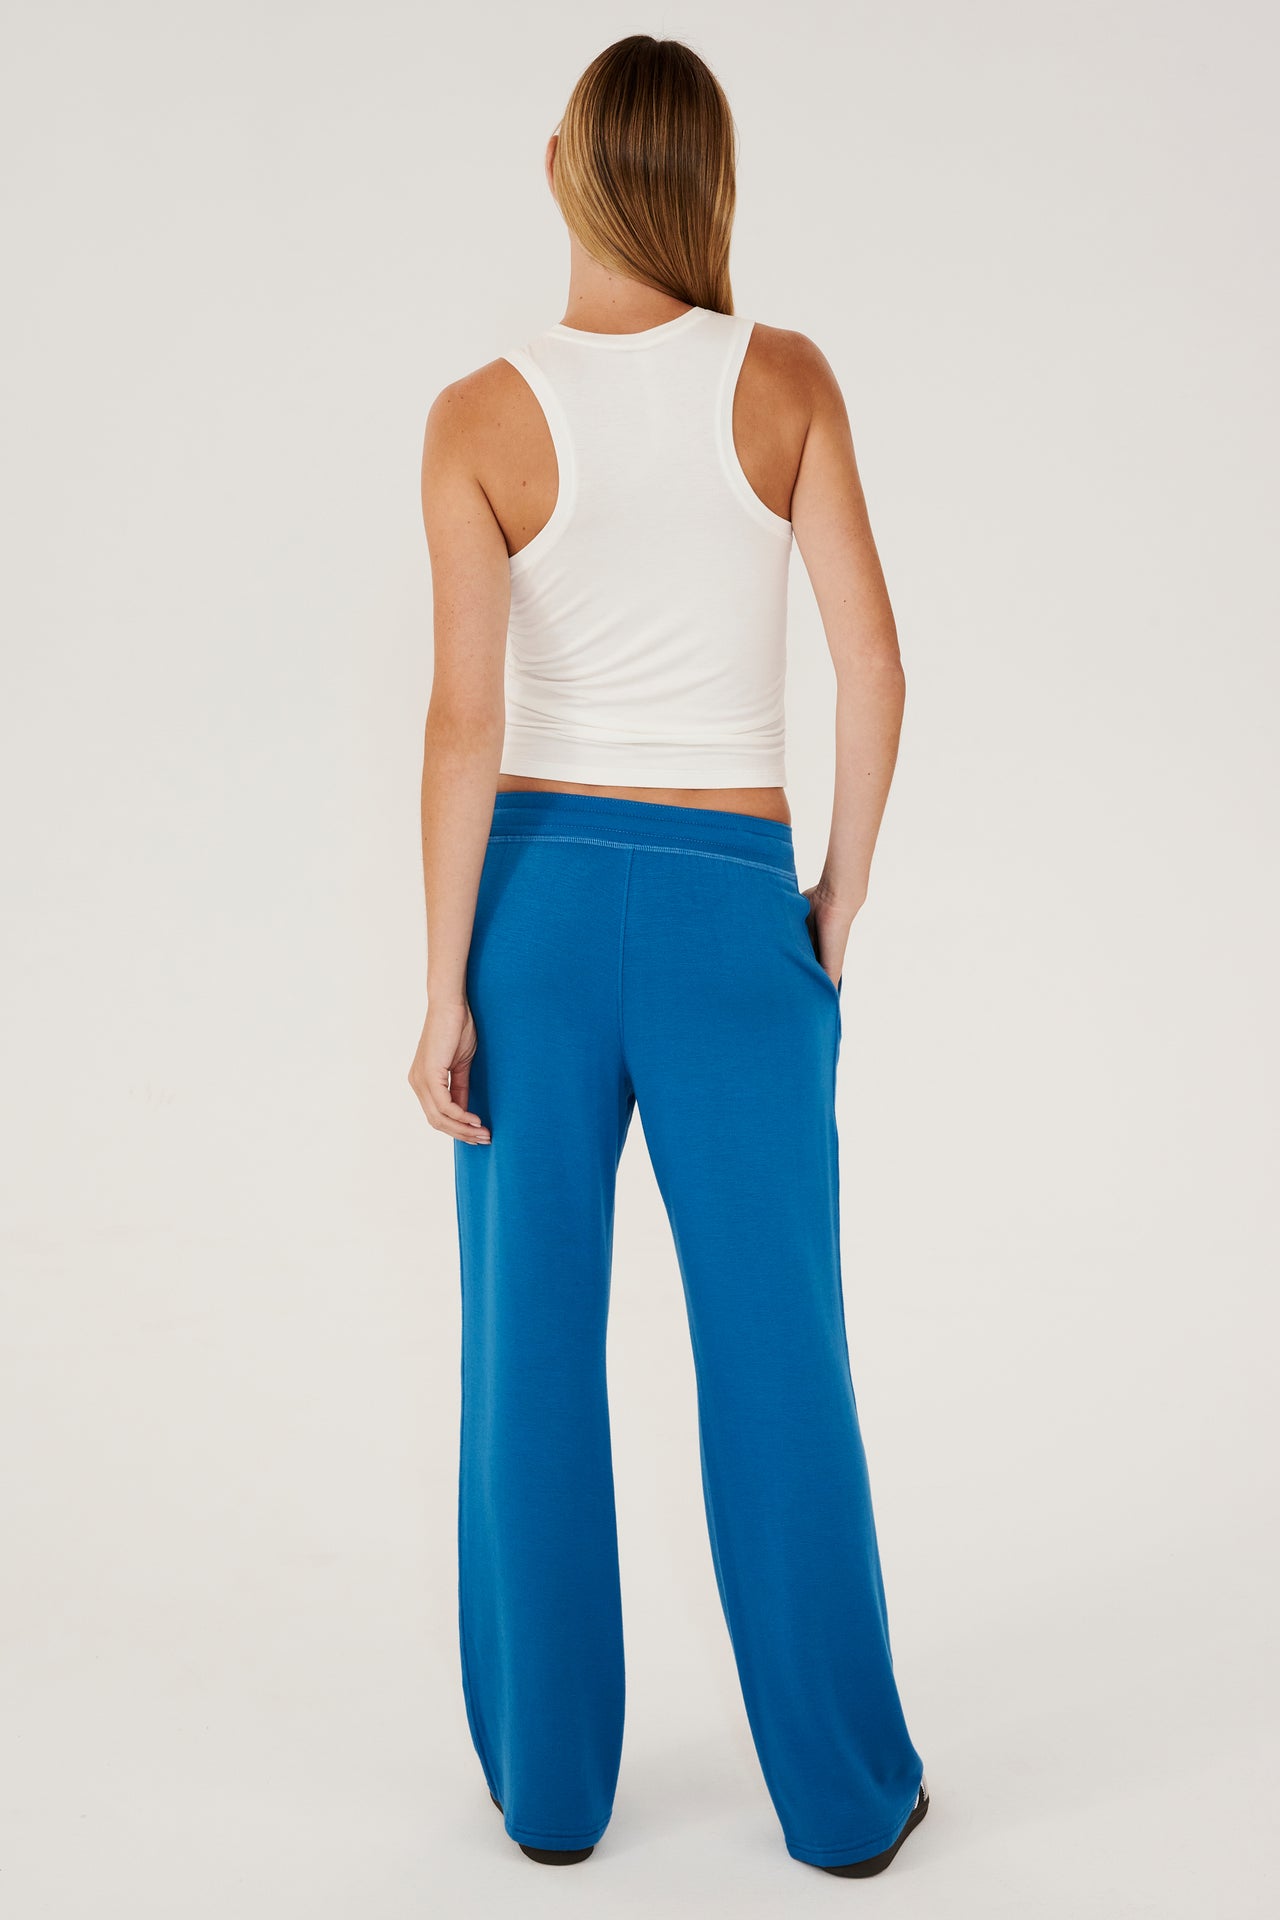 Full back view of woman with straight blonde hair wearing a bright blue high rise wide leg relaxed fit sweatpant with side pockets and white drawstring. With white high neckline racer tank top. Paired with white and grey shoes with black stripes.